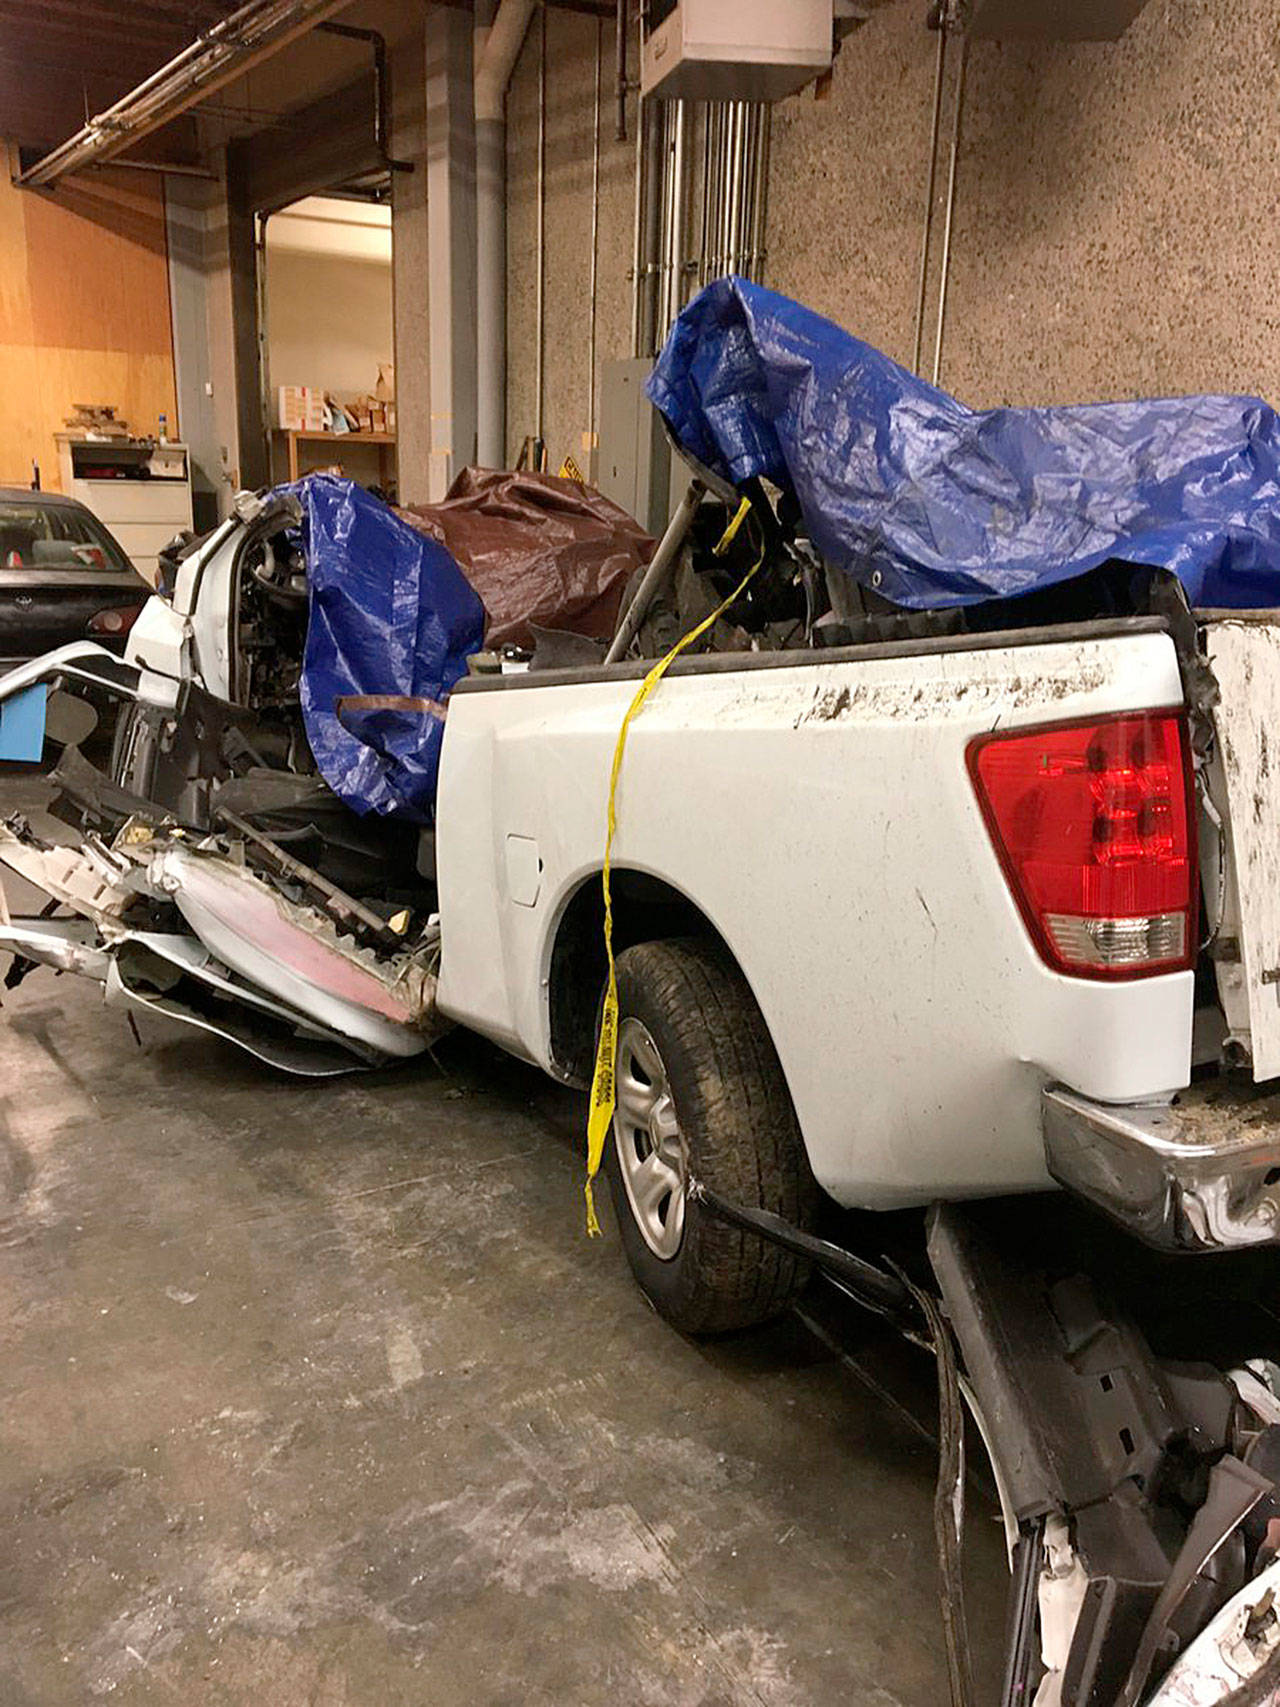 The Washington State Patrol on Tuesday released this photo of the white 2004 Nissan Titan pickup that crashed and killed four Kent men early Sunday along State Route 518. The driver, also of Kent, survived and has been arrested on four counts of vehicular homicide. COURTESY PHOTO, Washington State Patrol